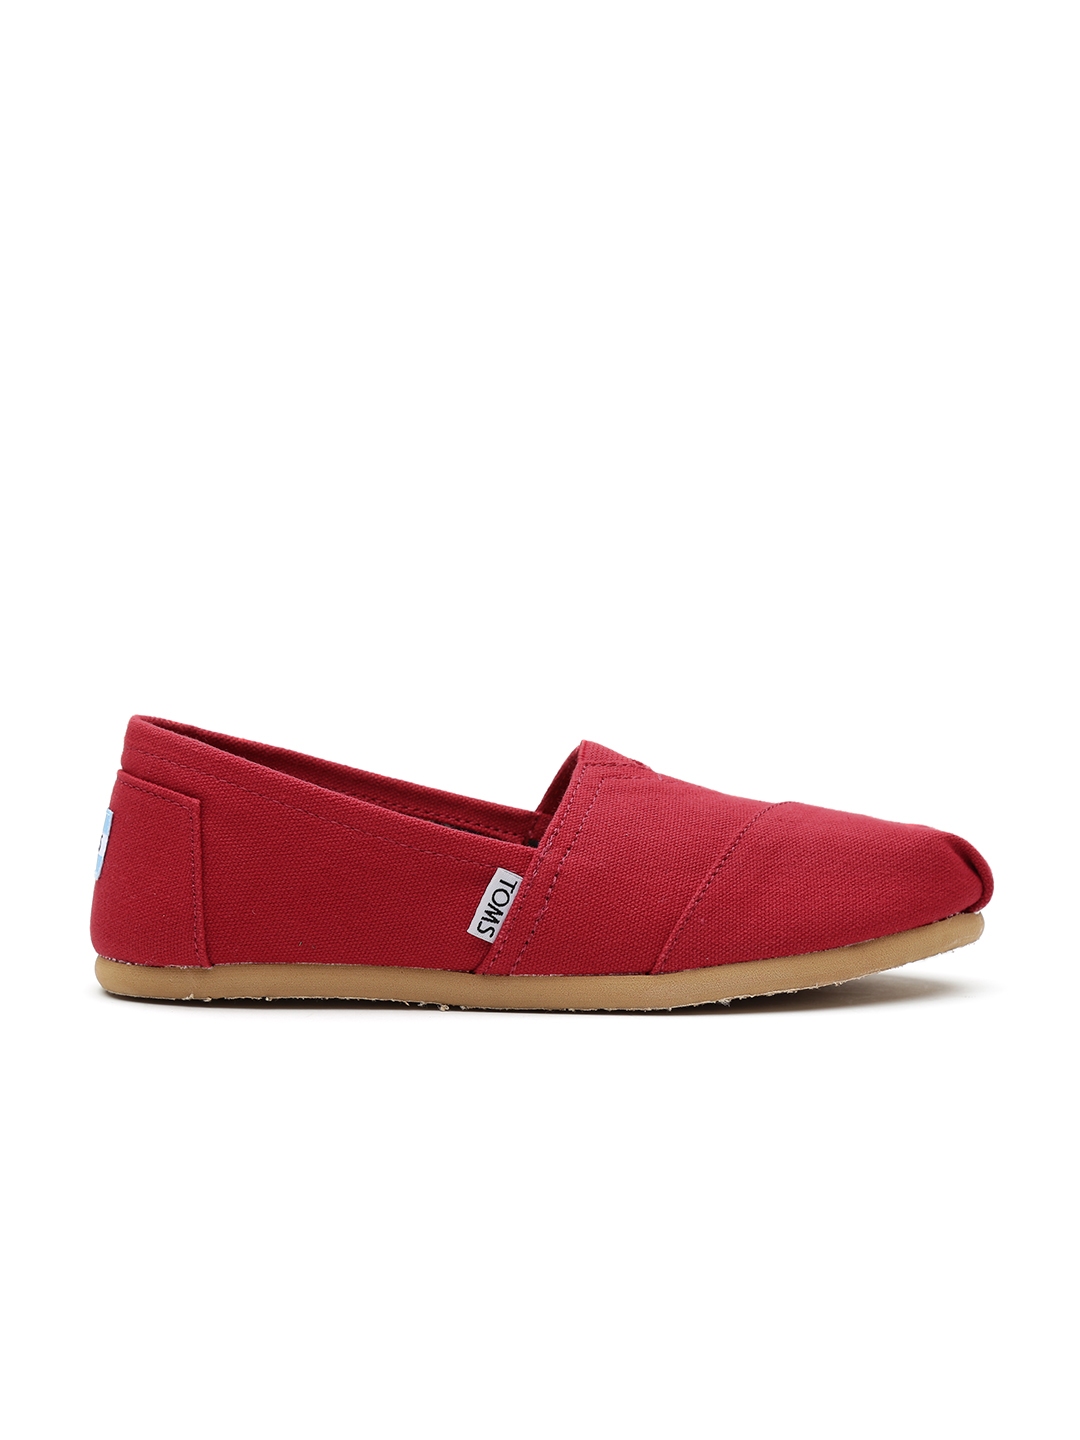 94 Best Buy toms shoes baton rouge for All Gendre